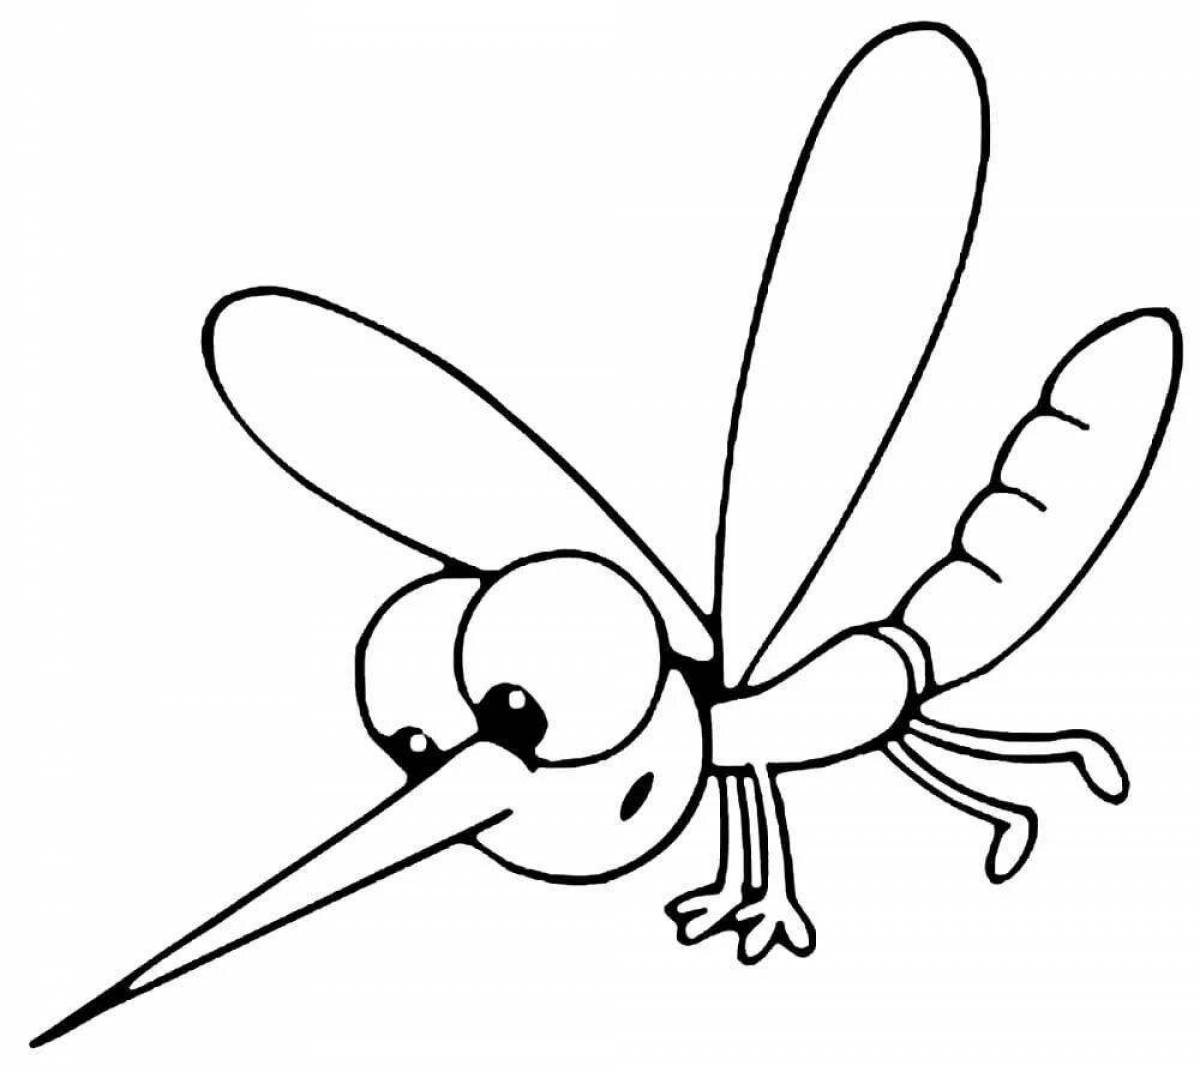 Magic mosquito coloring page